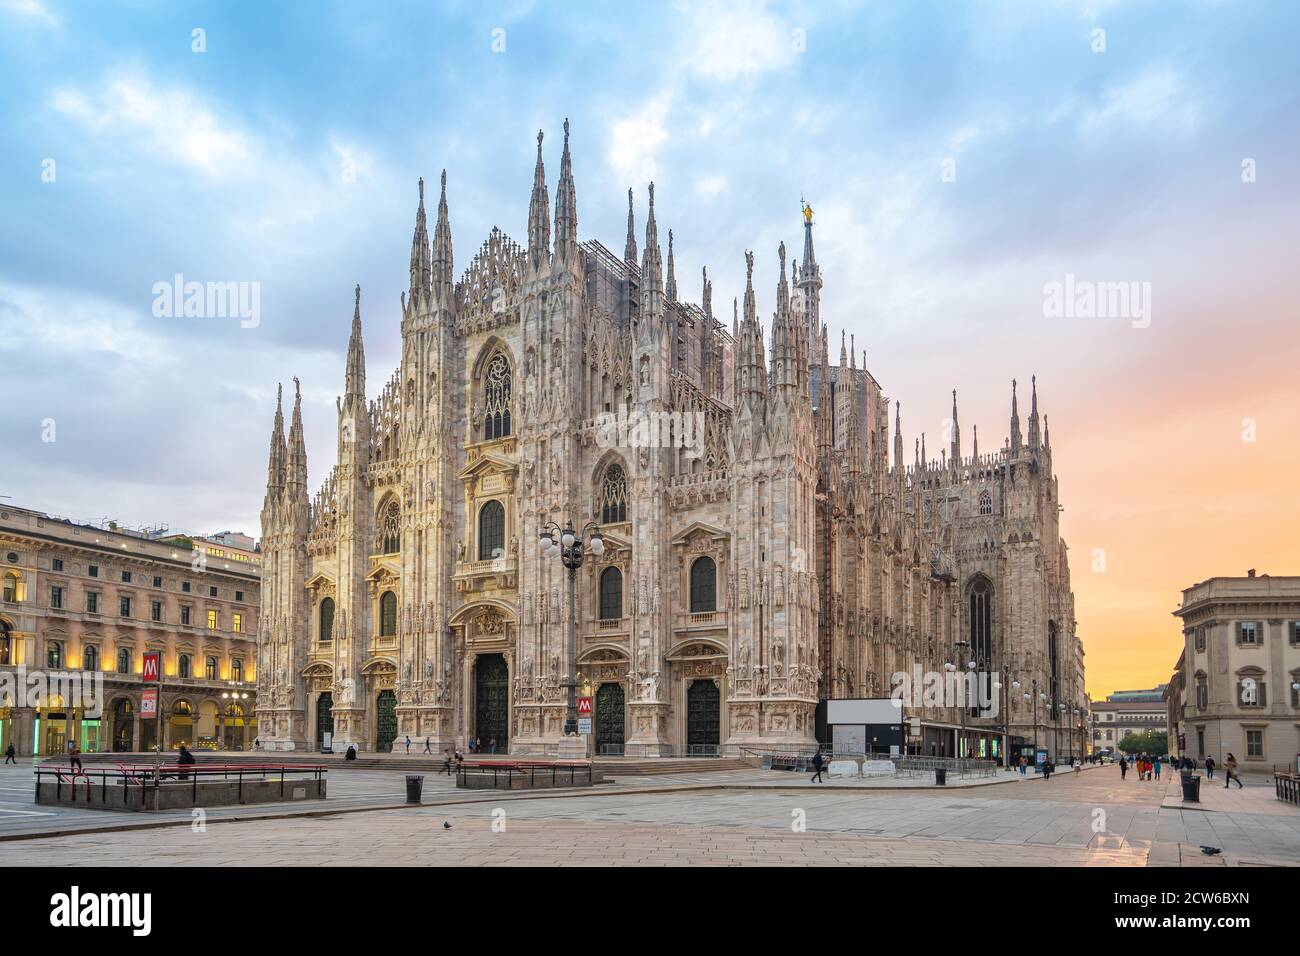 Nice sky with view of Milan Duomo in Italy. Stock Photo